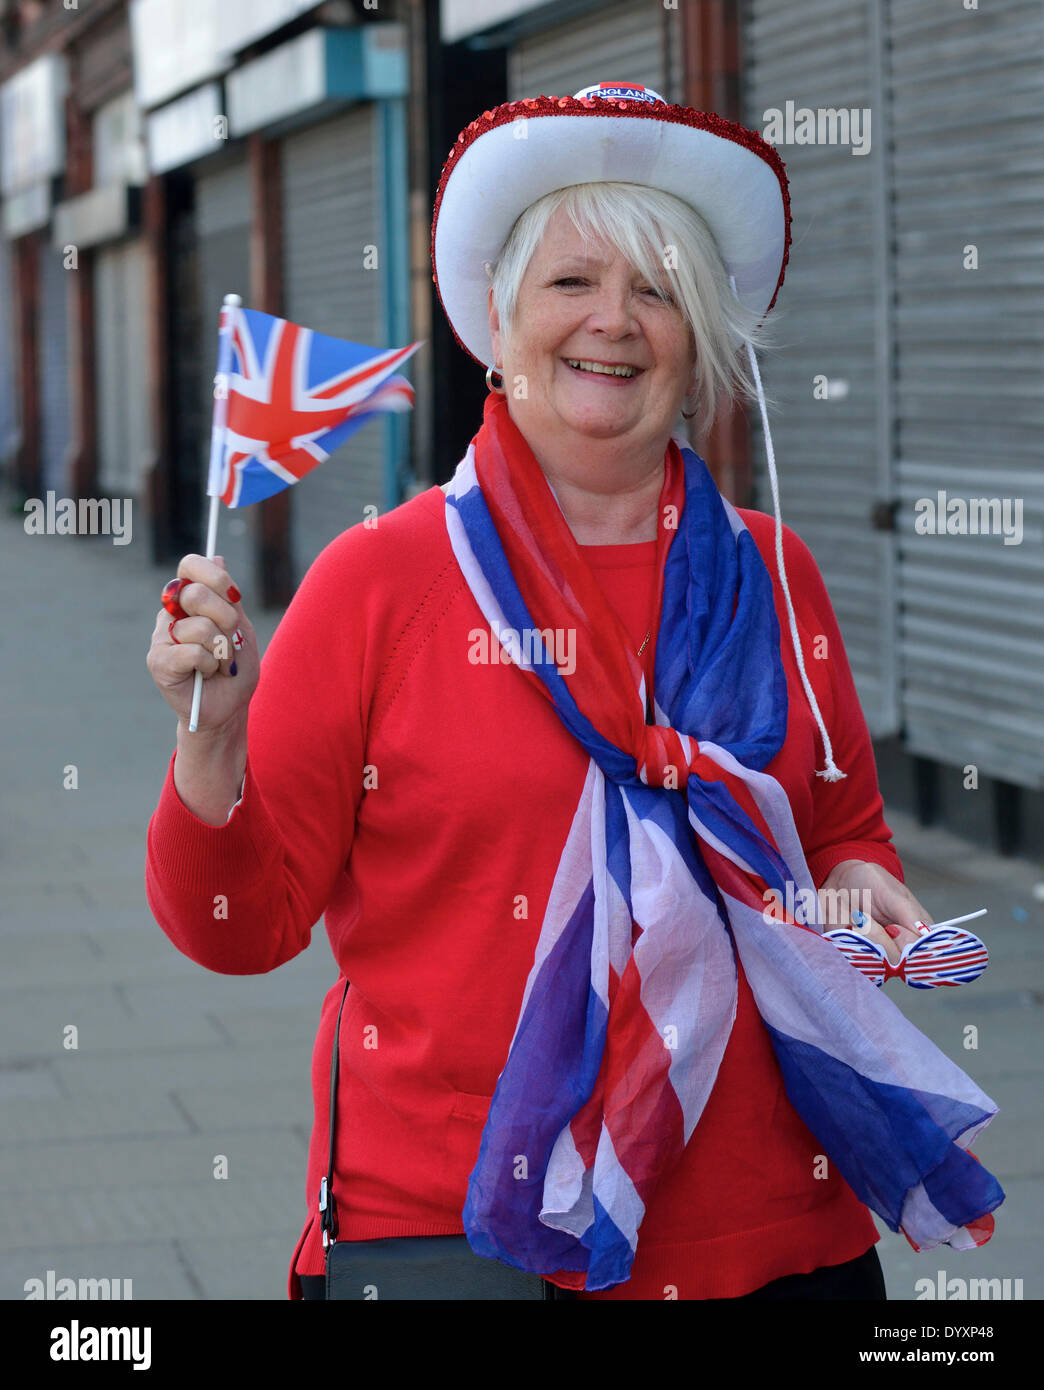 Manchester, UK. 27th Apr, 2014. Sixty-seven year old Linda Curran shows the England flag as she waits for the St George's Day Parade to pass along Oldham Road on its way through the centre of Manchester. St George's Day Parade  Manchester, UK  27th April 2014 Credit:  John Fryer/Alamy Live News Stock Photo